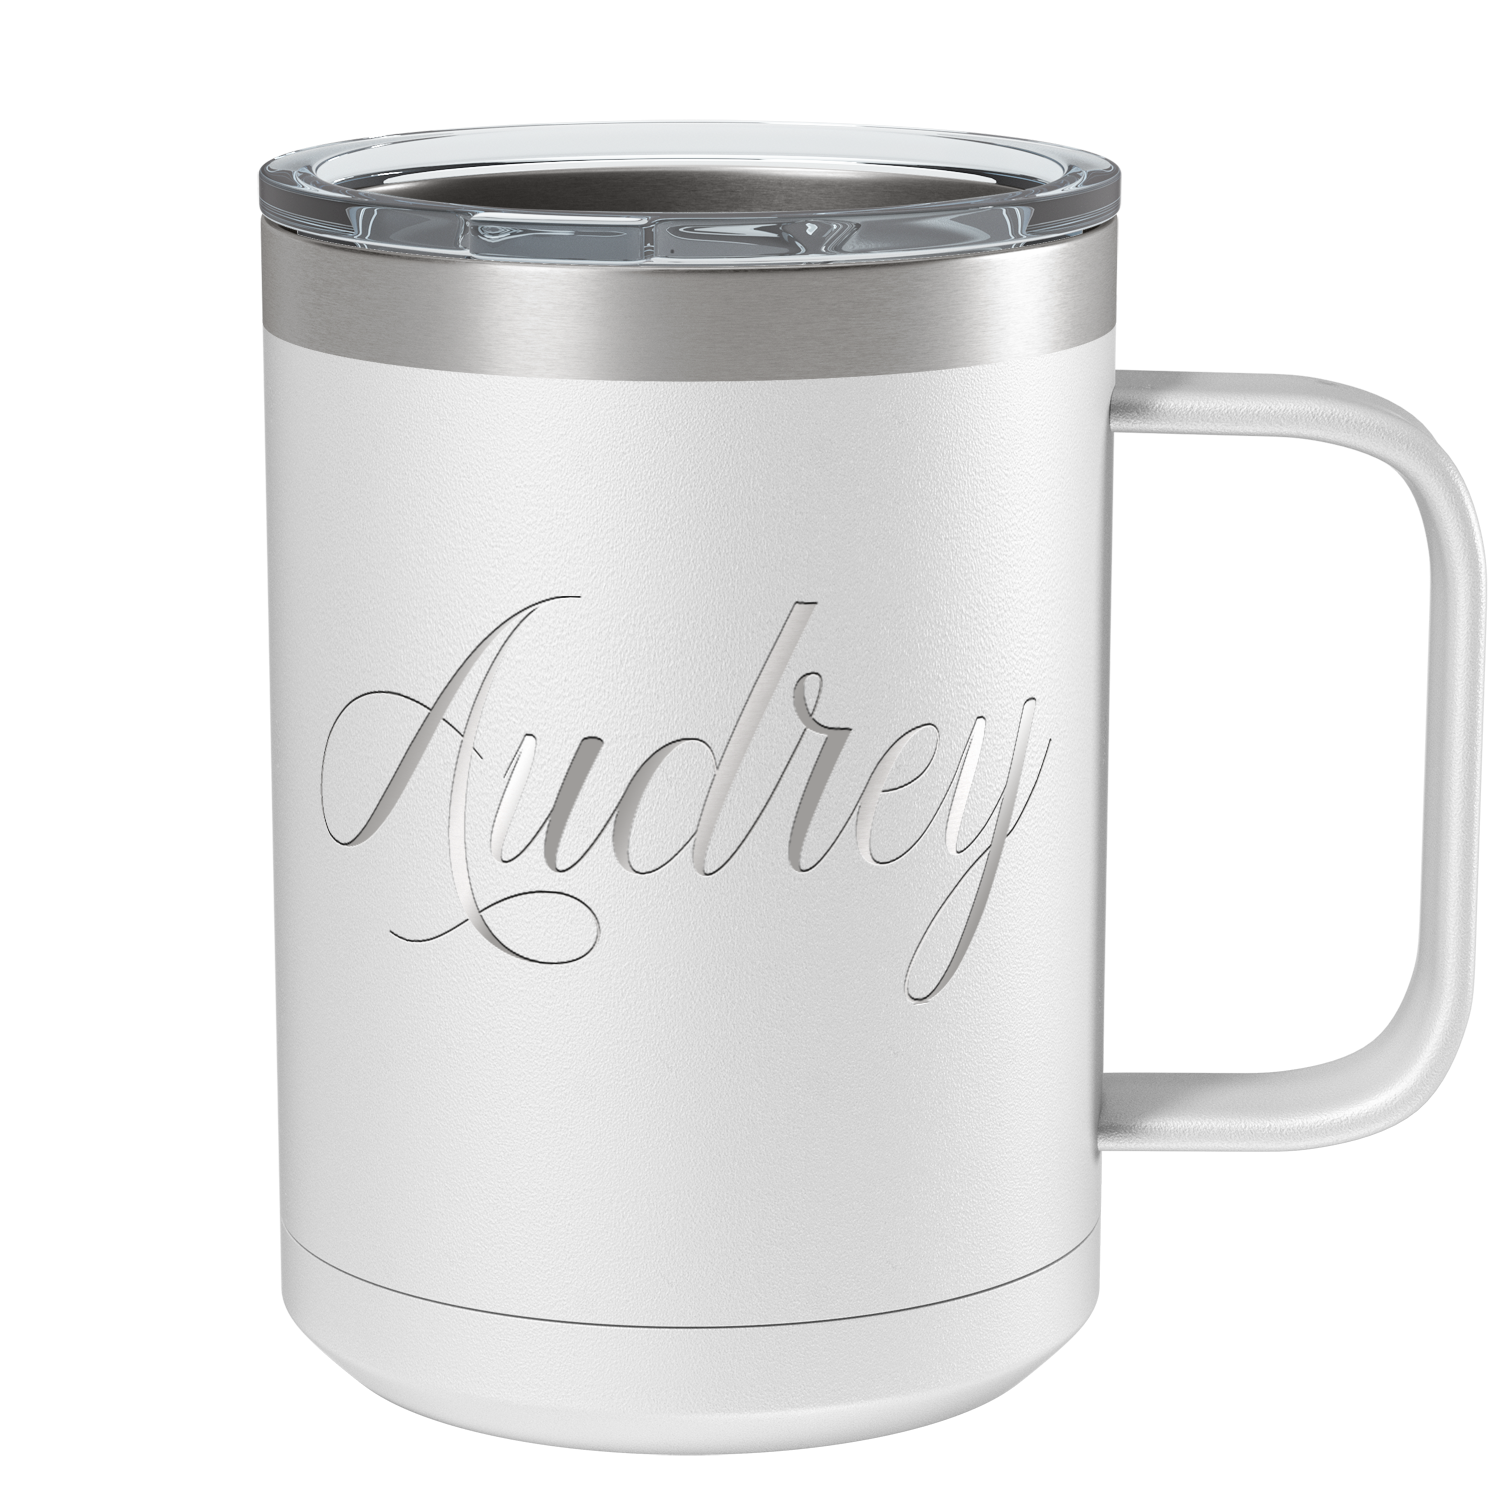 Cuptify Personalized Engraved 15 oz Stainless Steel Coffee Mug - White